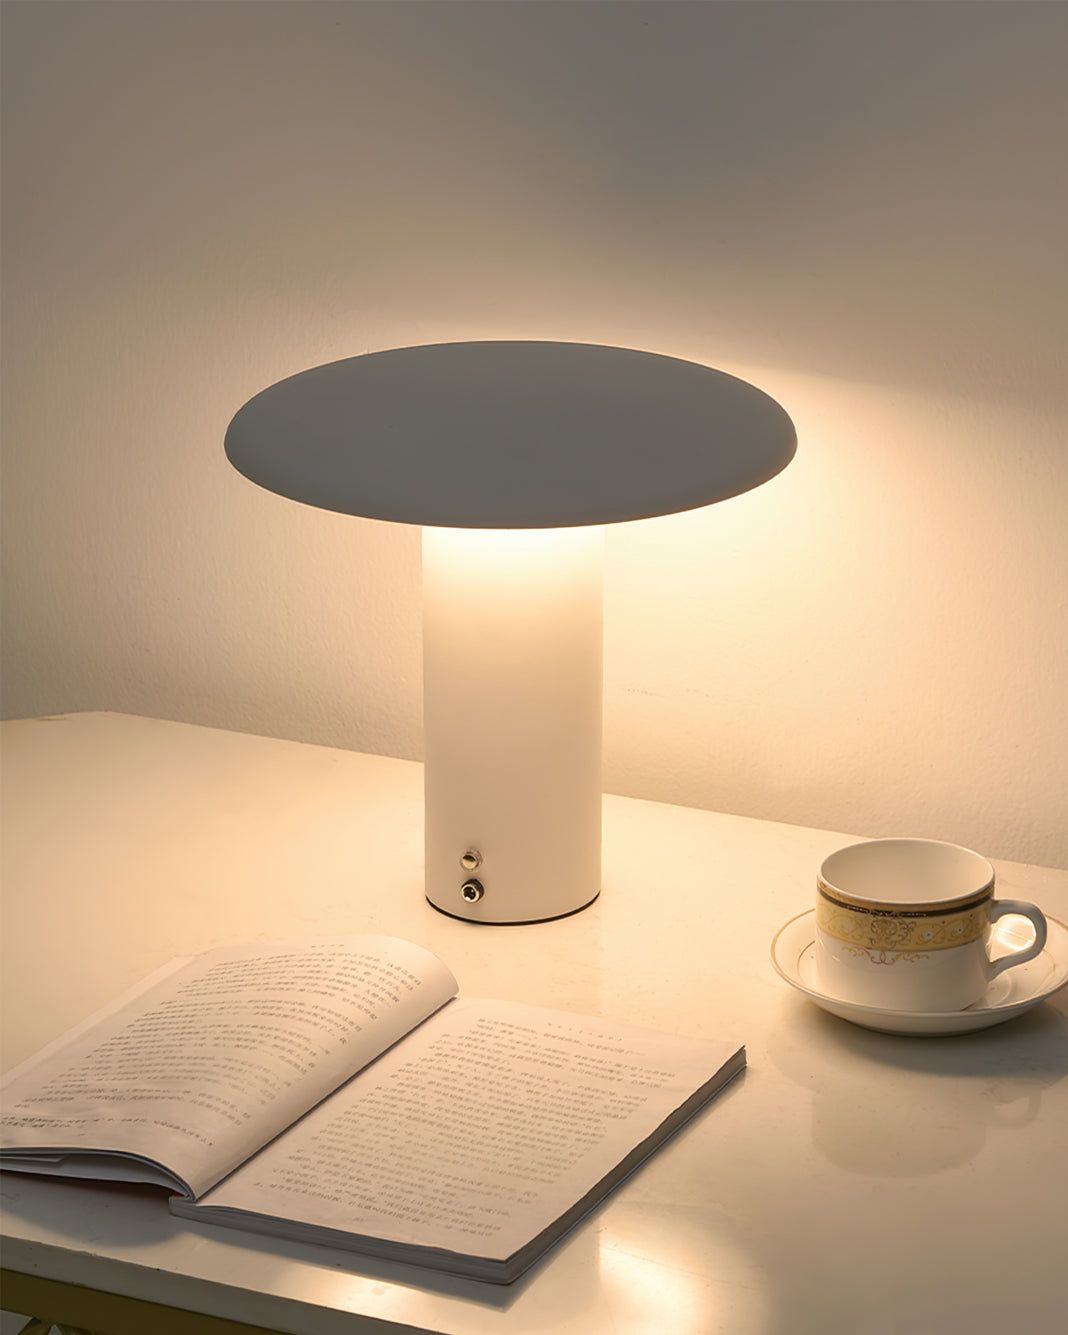 Best Table Lamps for Productivity in Workspaces